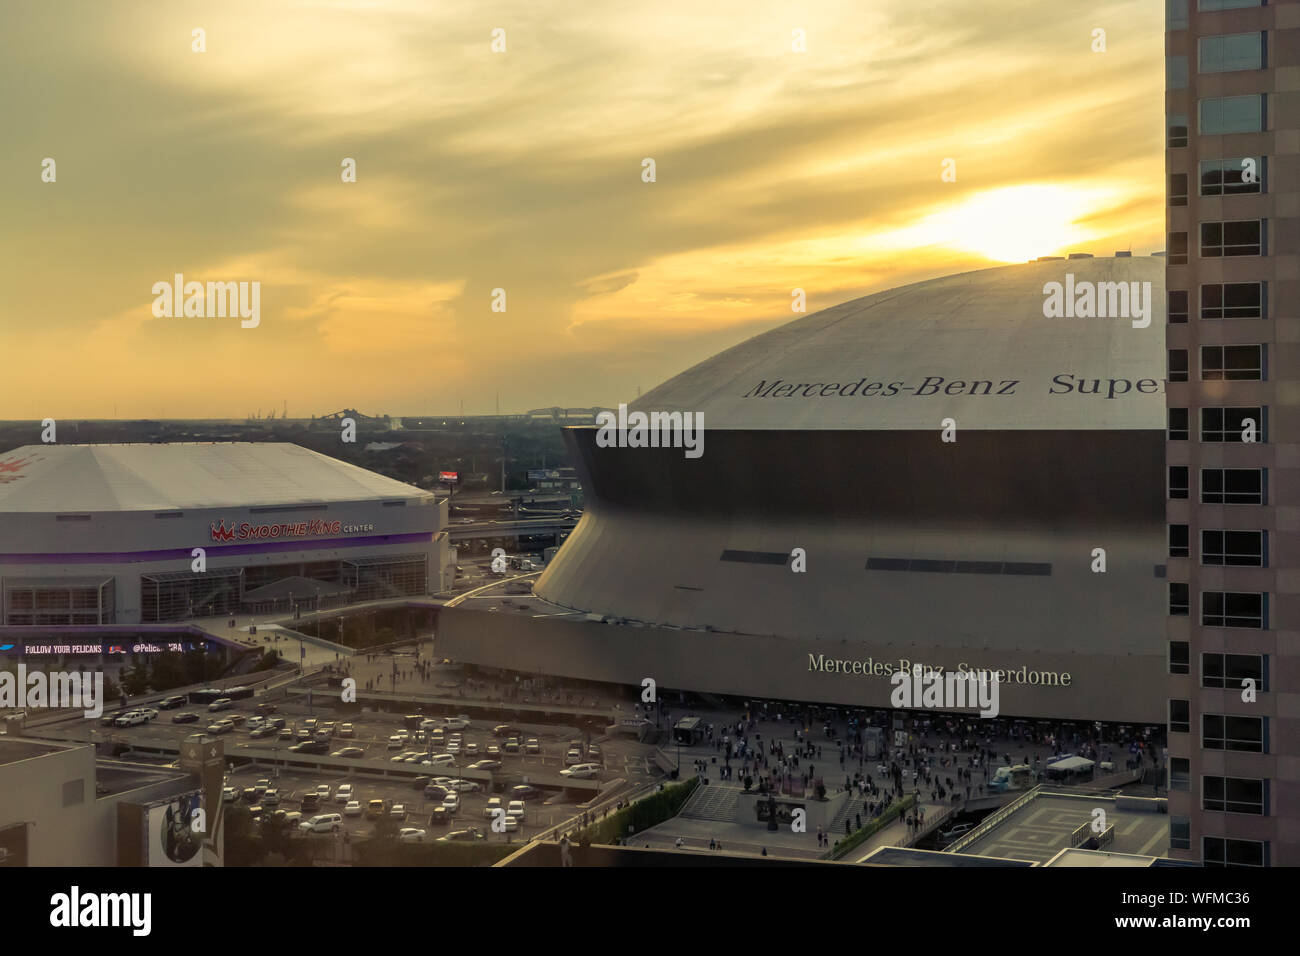 New Orleans, LA, USA - August 29, 2019: New Orleans Skyline with Mercedes-Benz Superdome and Smoothie King Center in New Orleans Louisiana Stock Photo